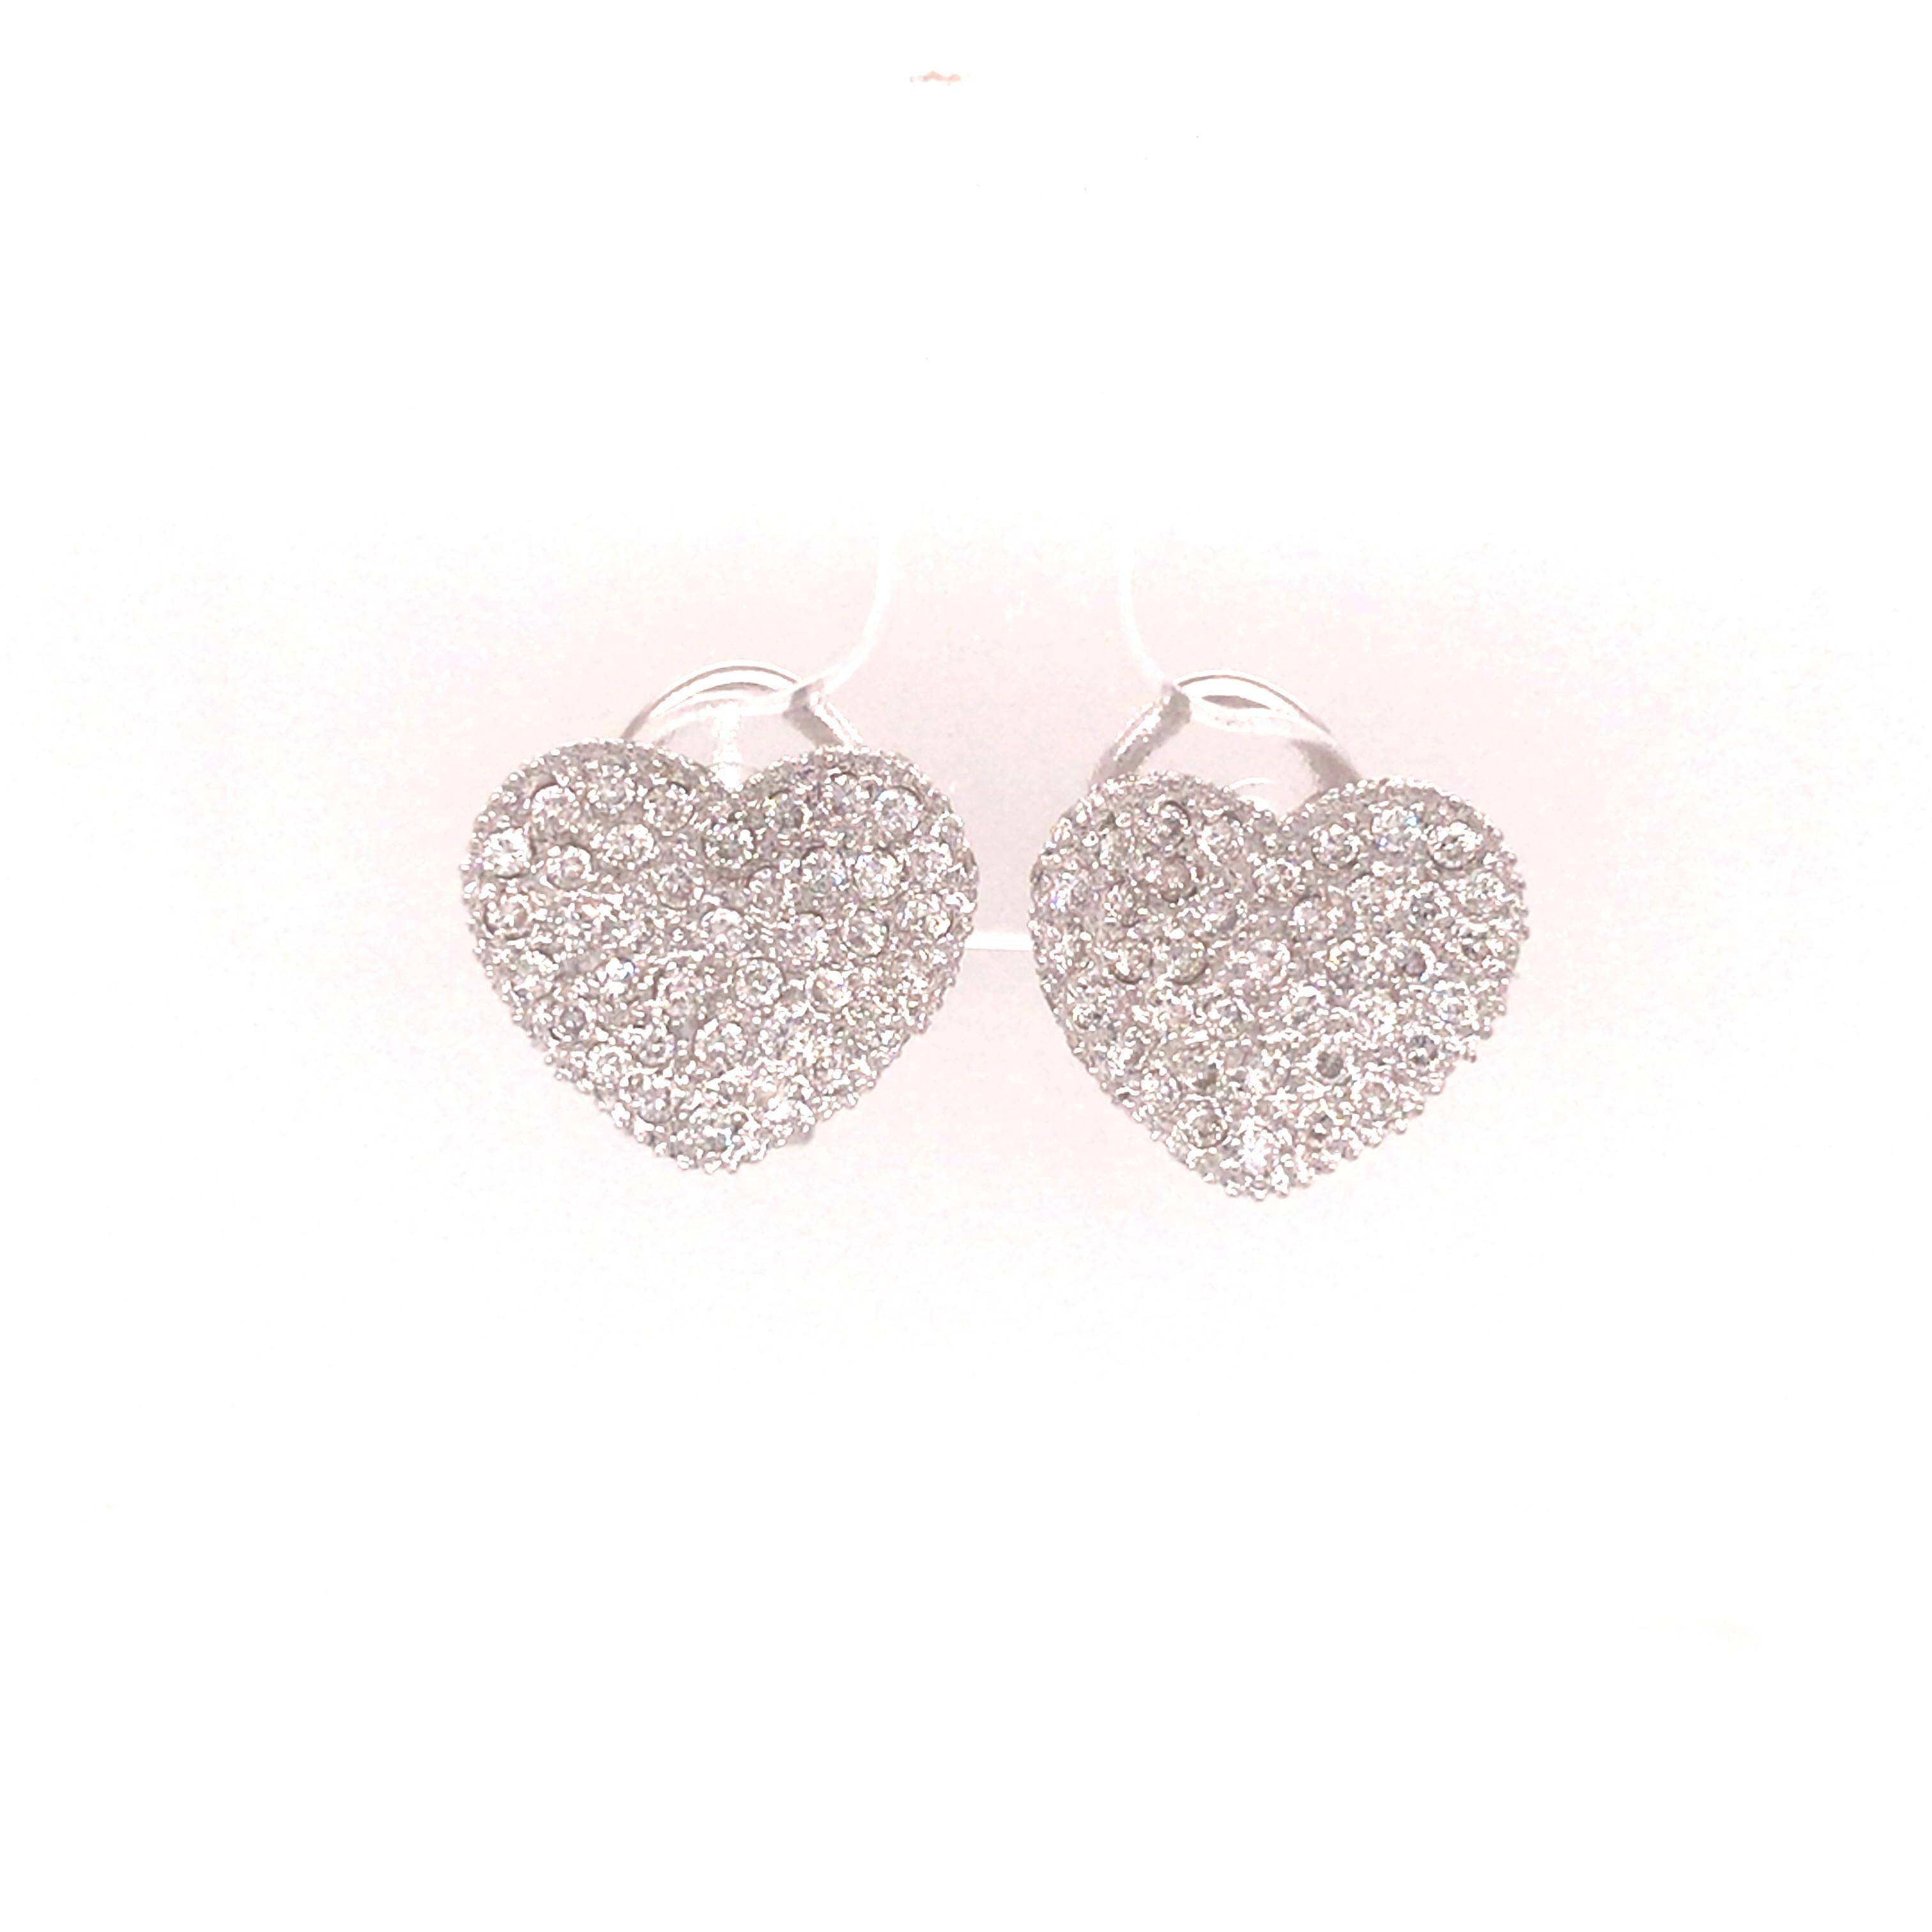 Diamond Pave Heart Earrings in 18K White Gold.  Round Brilliant Cut Diamonds weighing 2.75 carat total weight, G-H in color and VS-SI in clarity are expertly set.  The Earrings measure 9/16 inch in length and 5/8 inch in width.  Lever Back Closure.